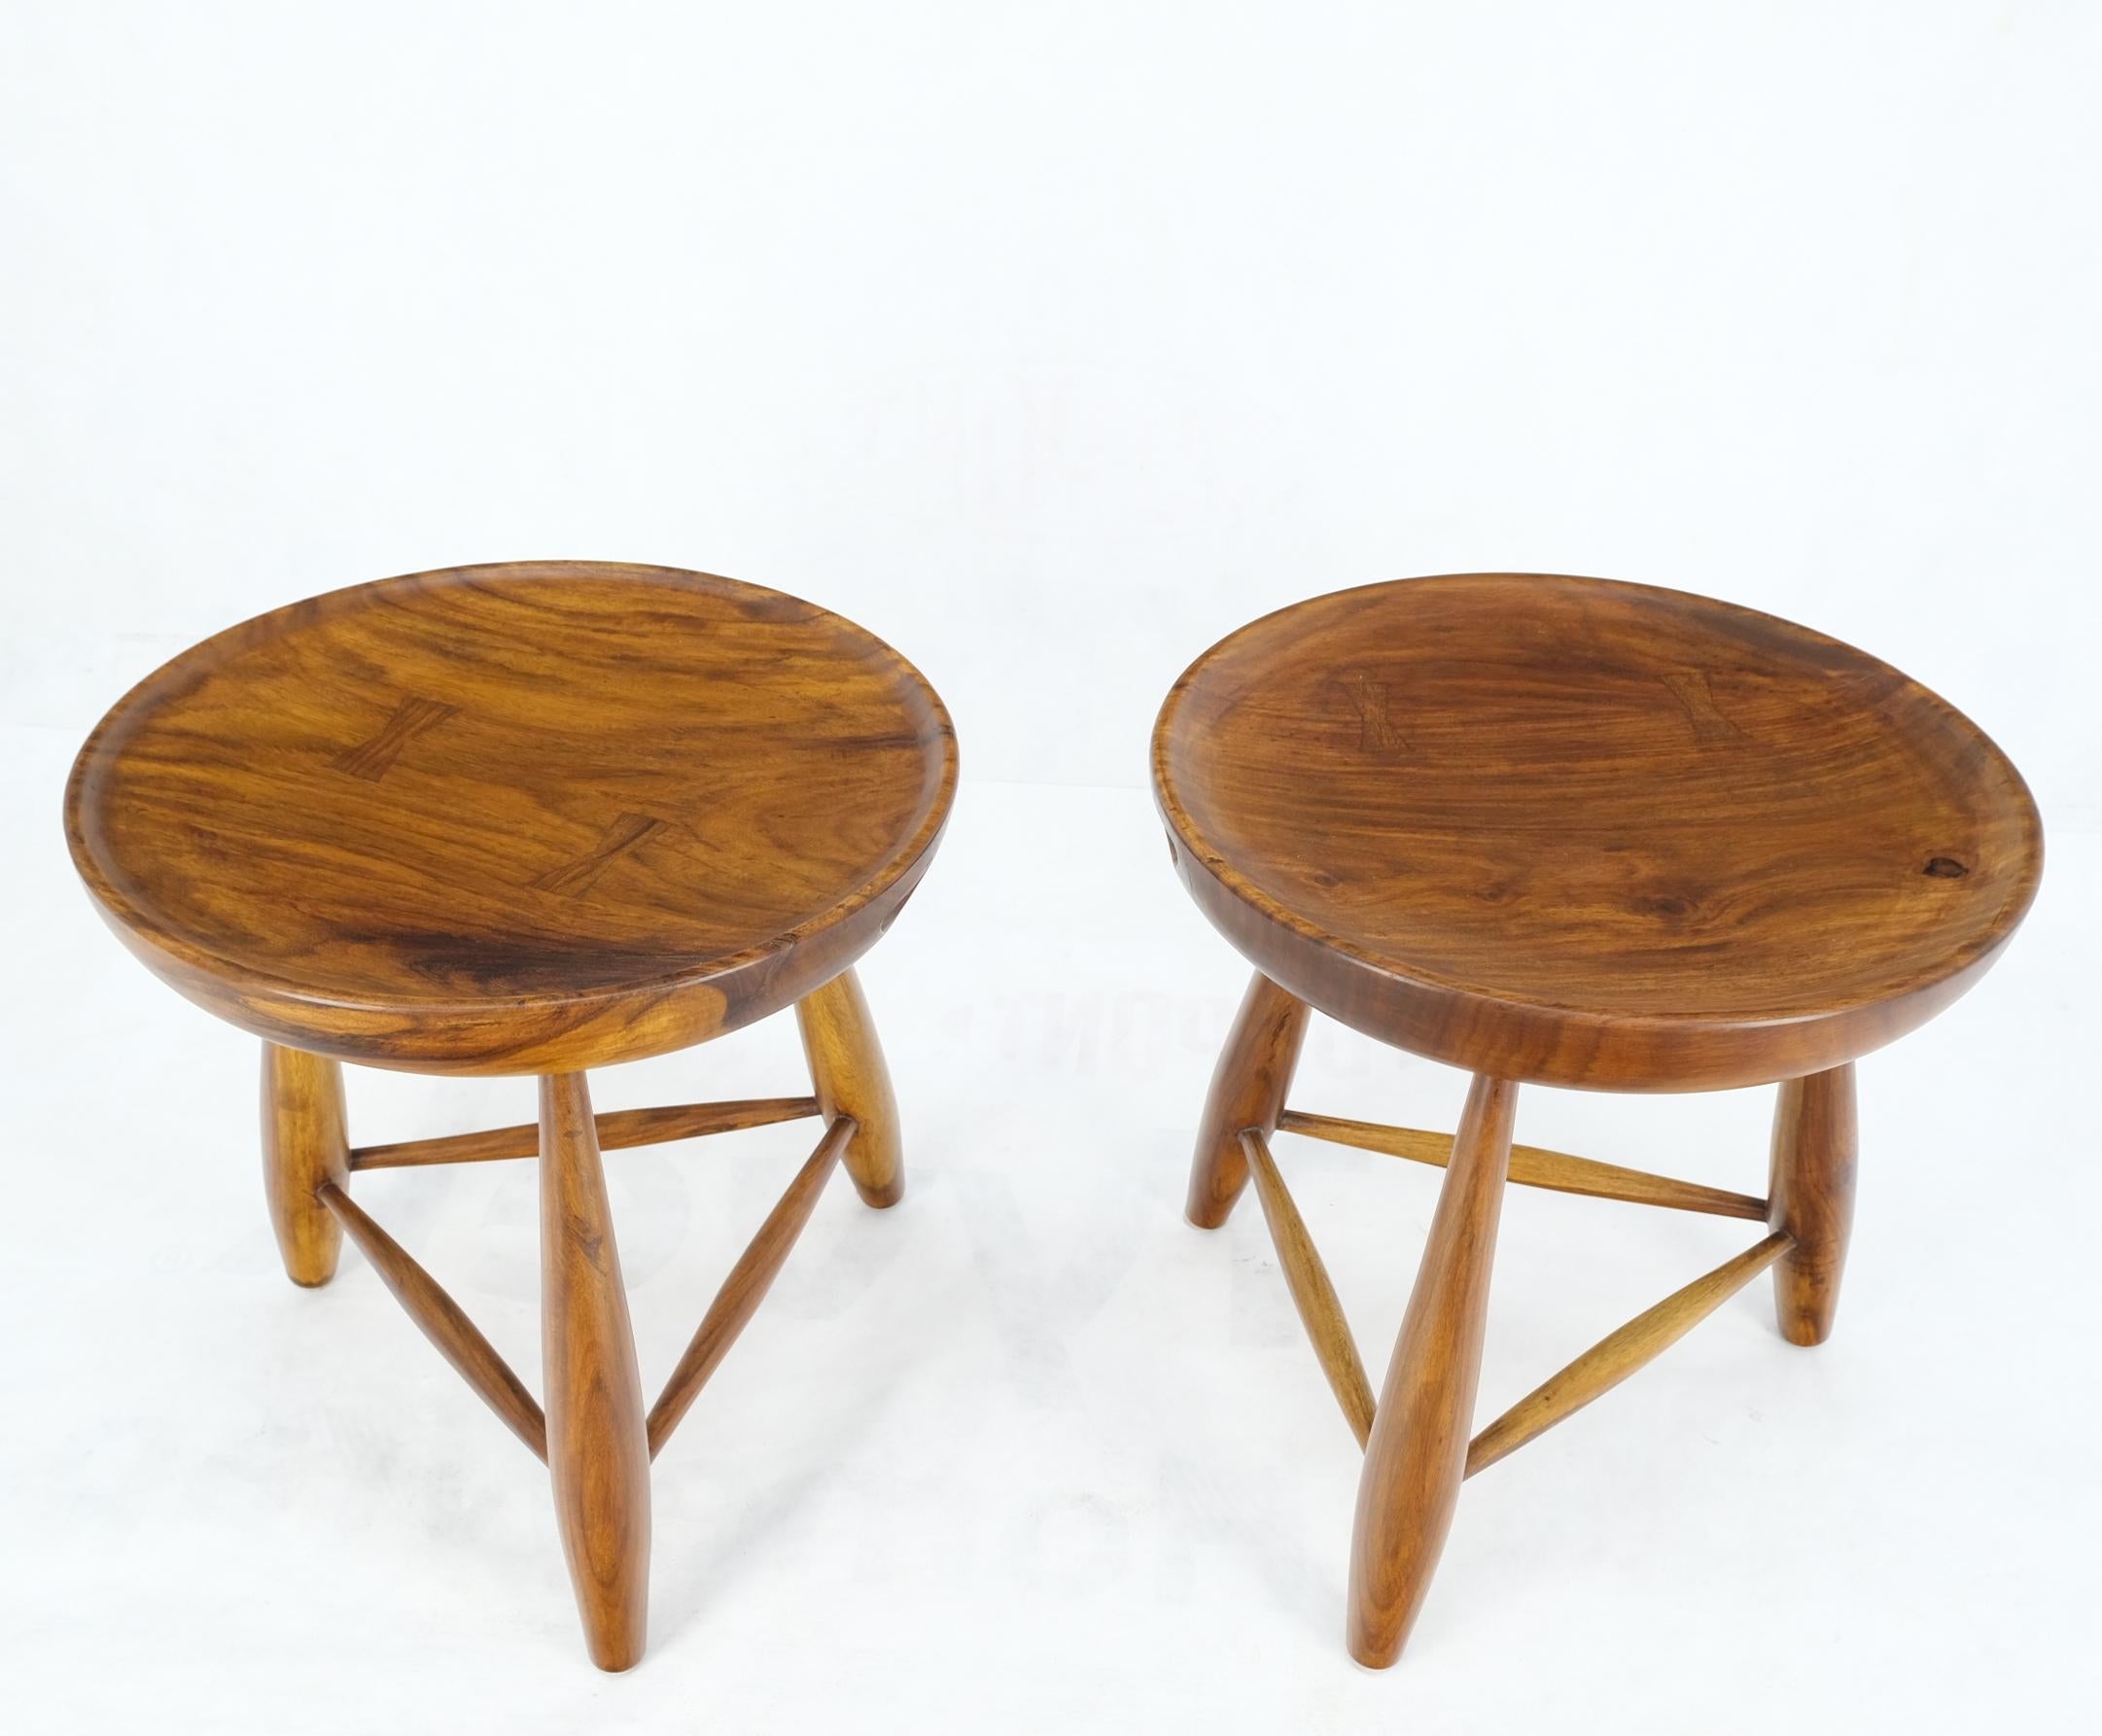 Pair of Heavy Solid Teak Dowel Leg Carved Concave Seat Benches Stools 4